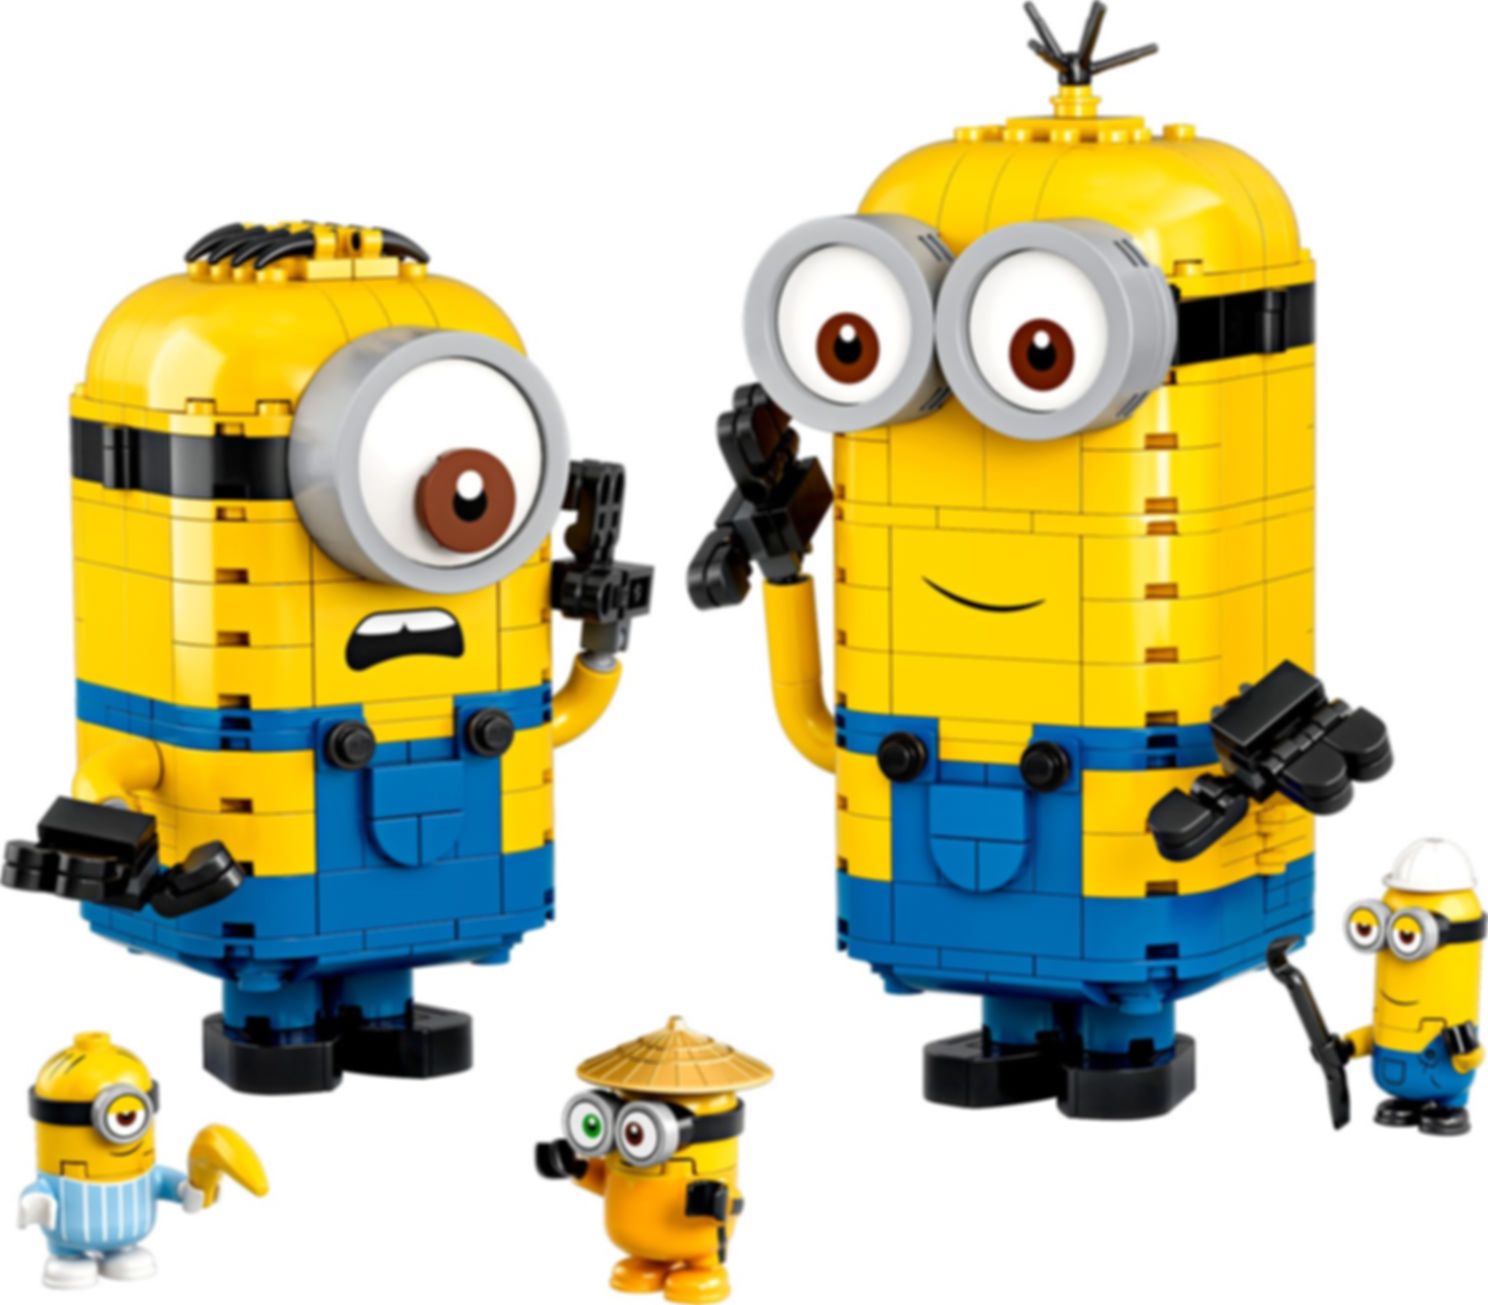 LEGO® Minions Brick-built Minions and their Lair components